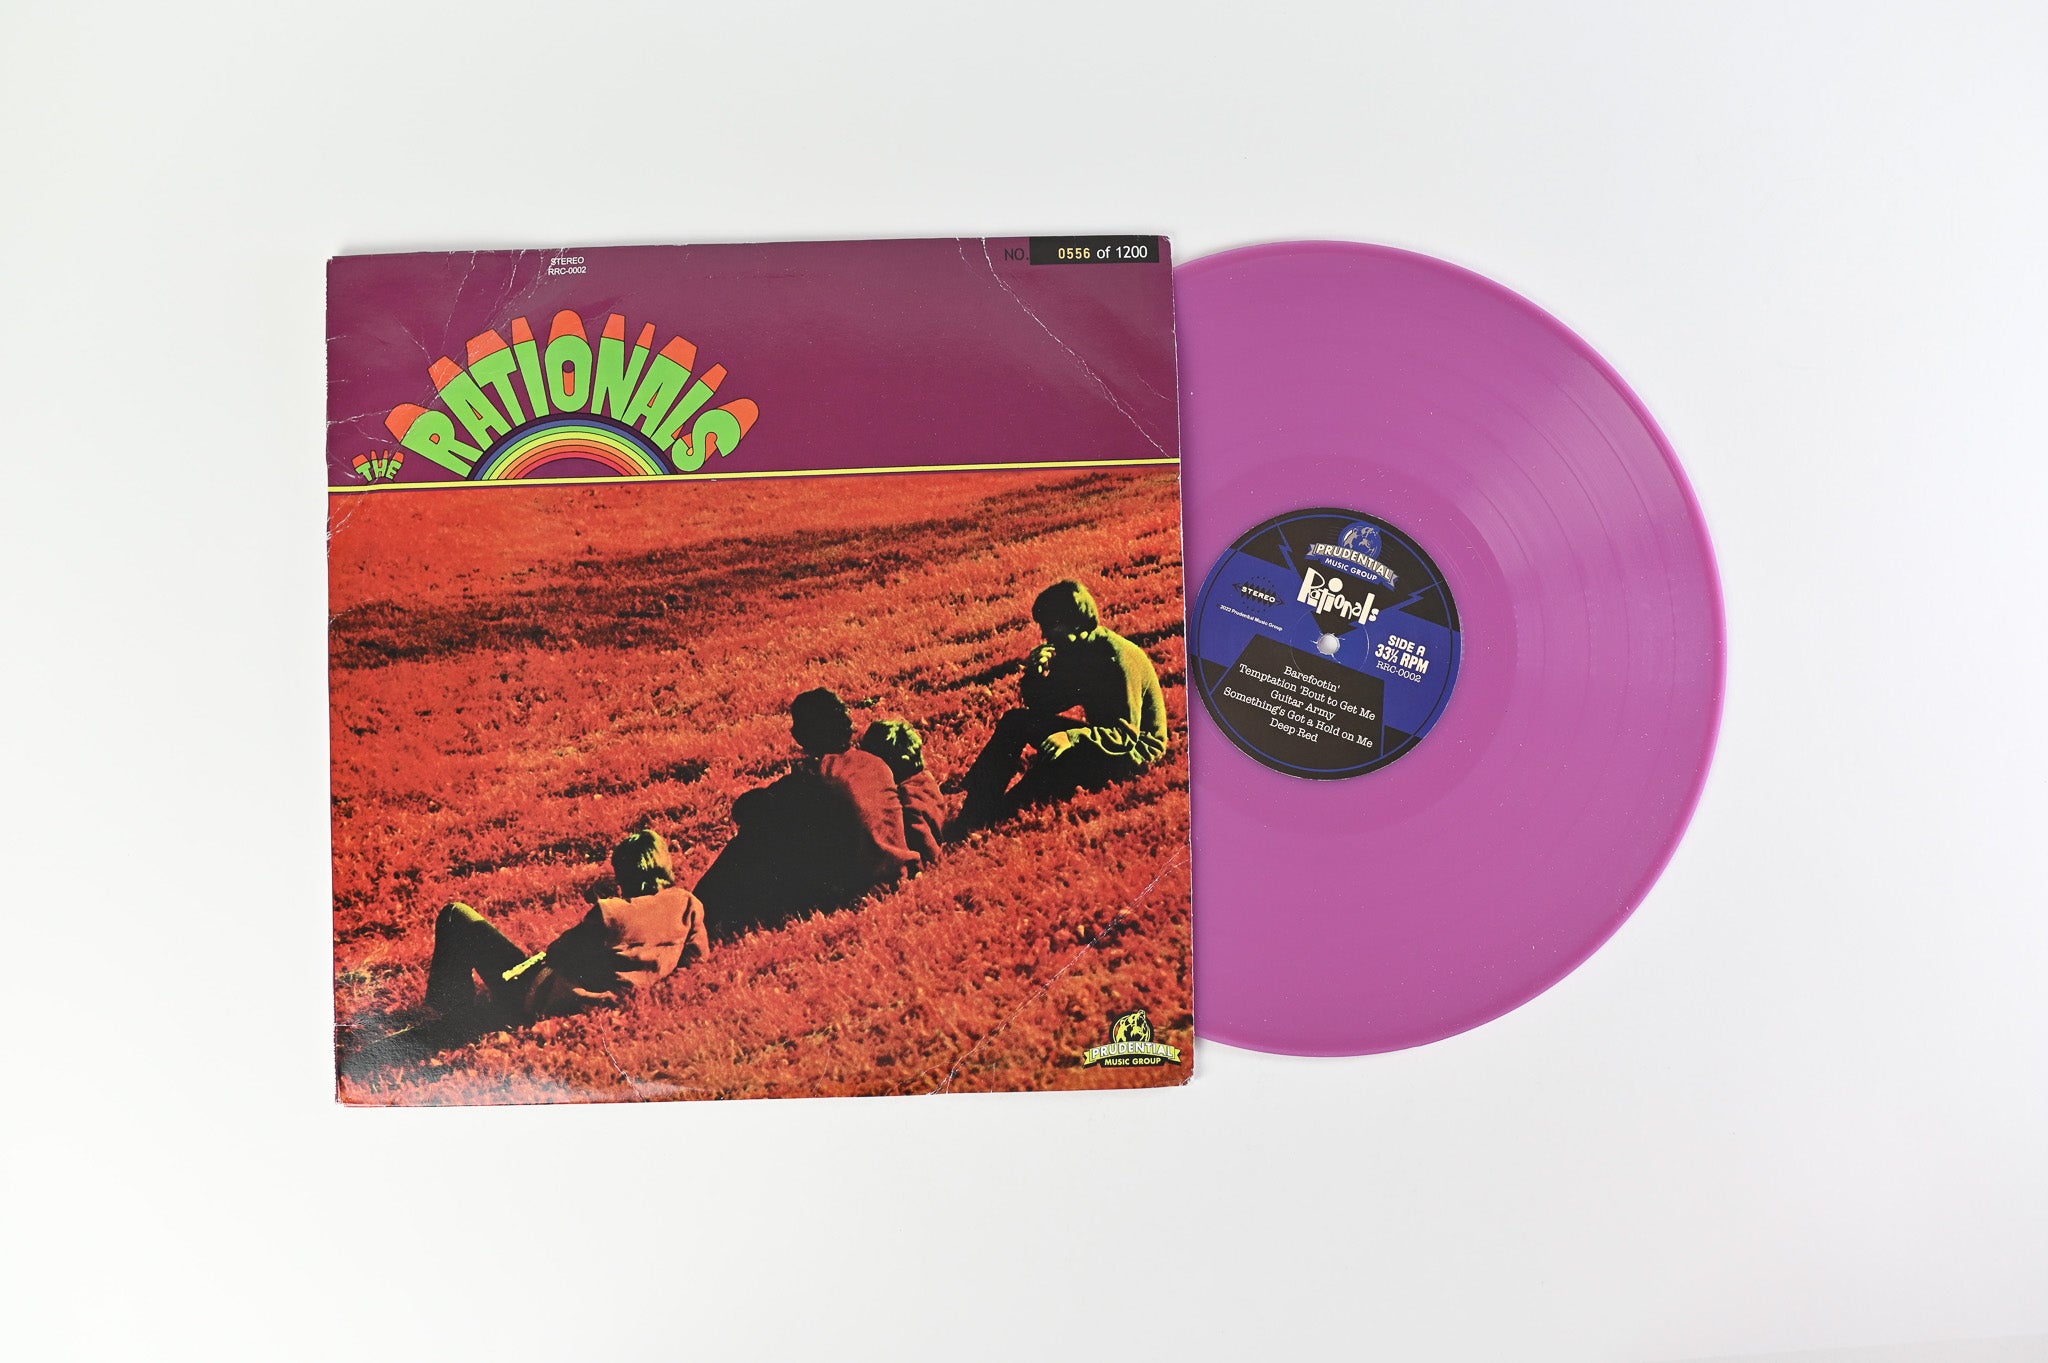 The Rationals - The Rationals on Prudential Music Group - Lavender Vinyl